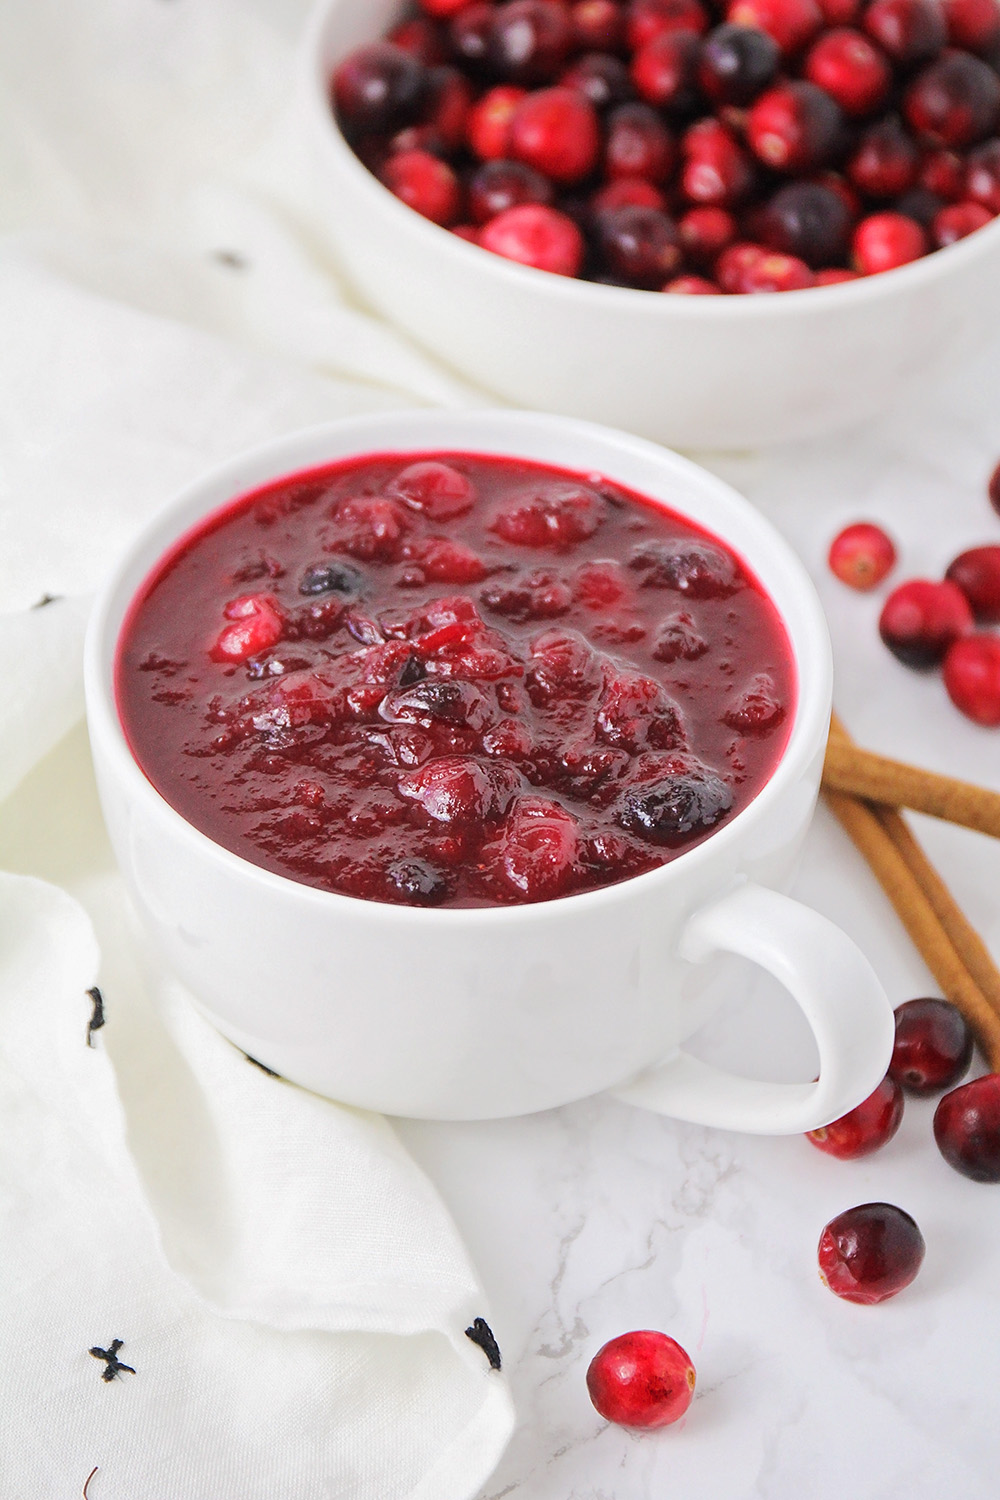 Homemade cranberry sauce - so delicious and way better than the canned stuff!